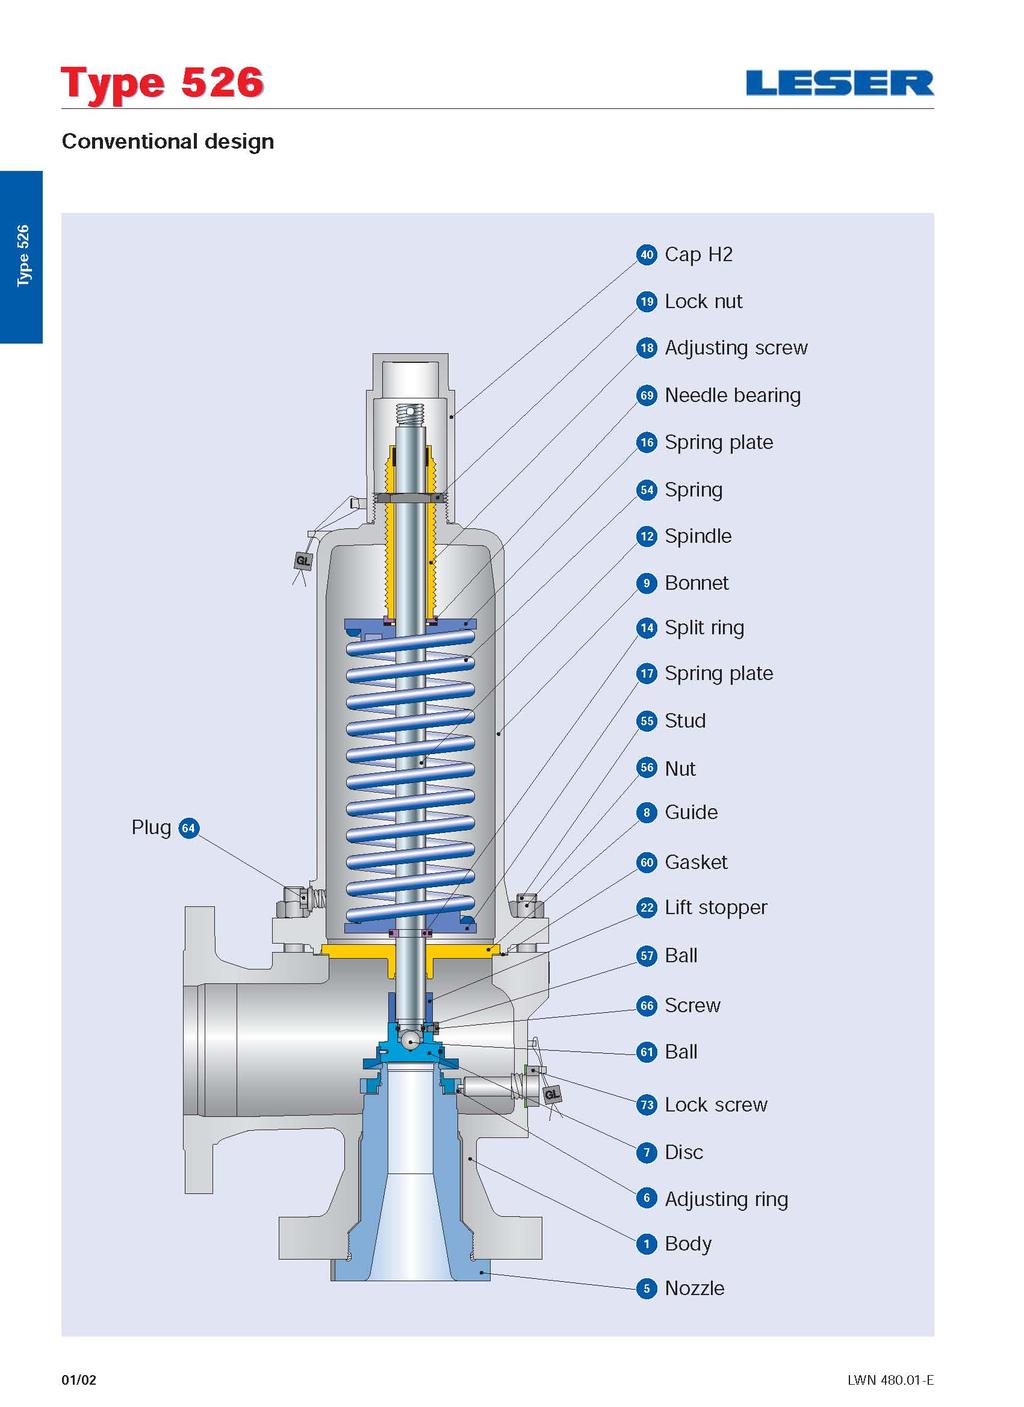 2.6 Parts of a Spring Loaded Safety Valve 2.6.1 Parts of a Conventional Spring Loaded Safety Valve Flanged Figure 2.